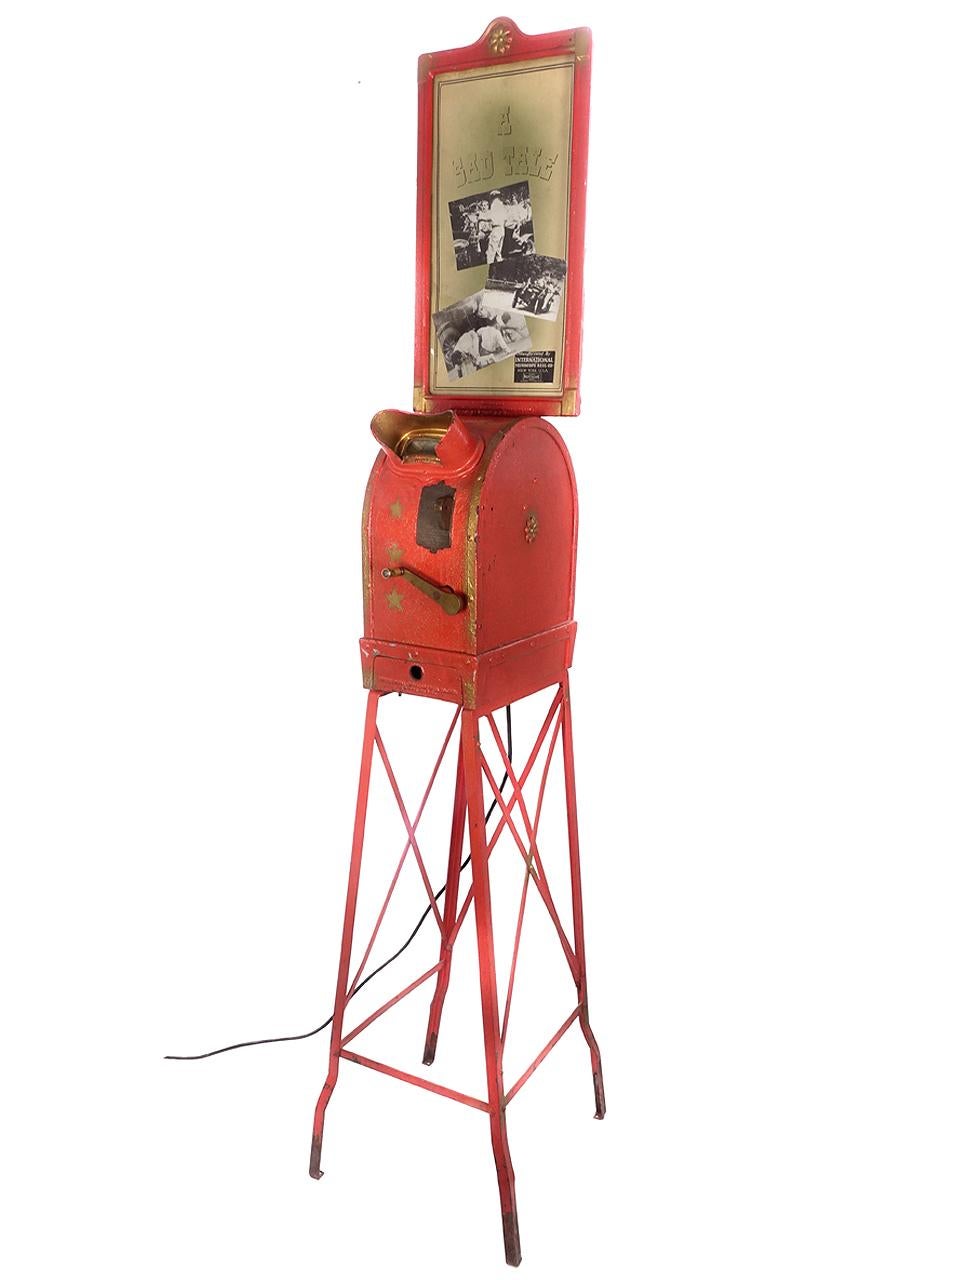 This is a nice working Mutoscope from the early 20th century. It is unrestored and in nice working order. The paint and red/gold paint patina is too nice to repaint. We like it just as it is. The movie reel is called 